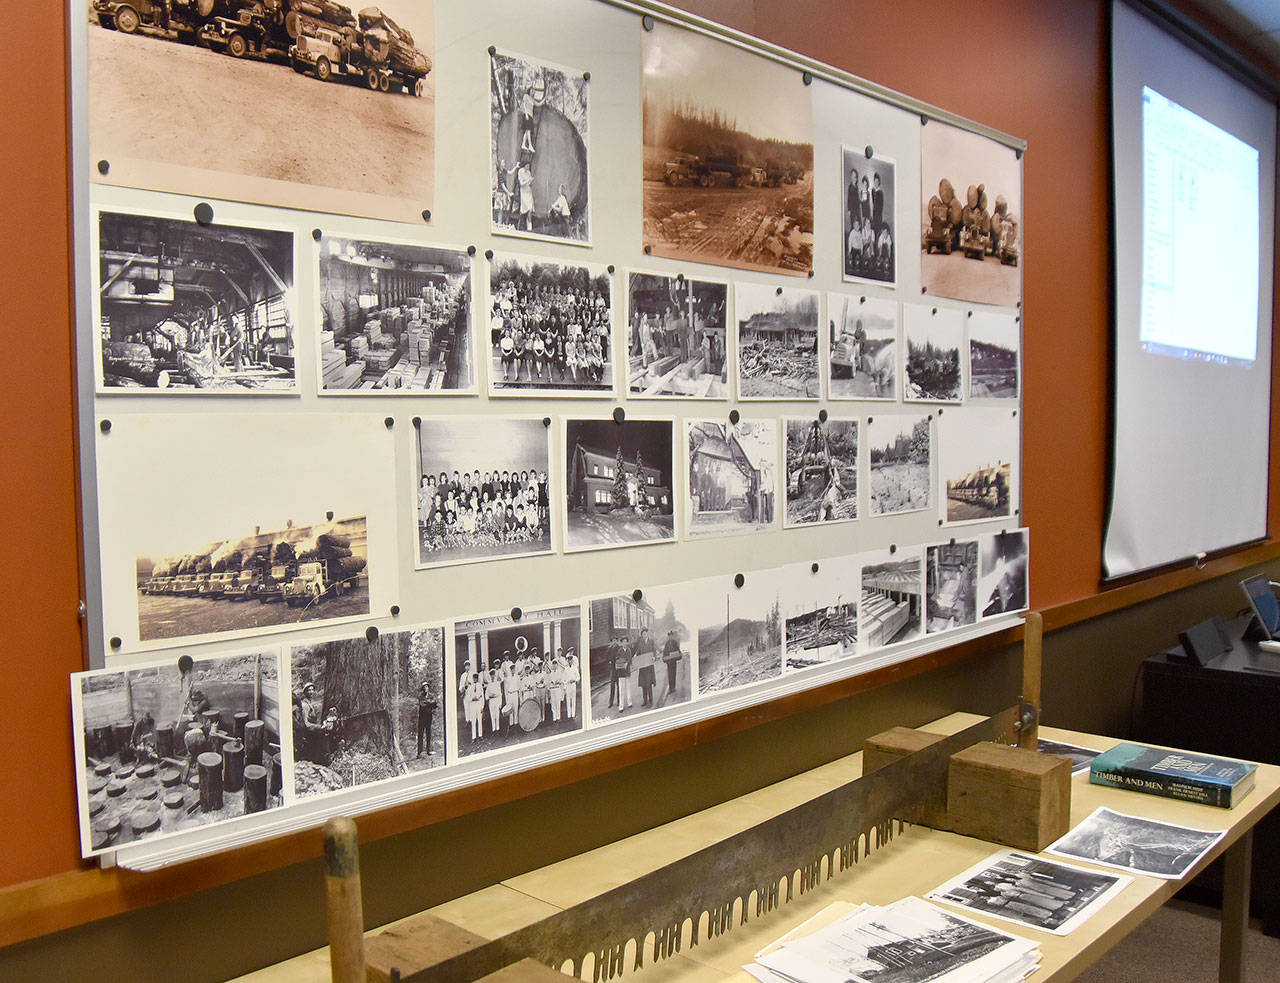 A display of historic photos drew many guests during the intermission. (Carol Ladwig/Staff Photo)